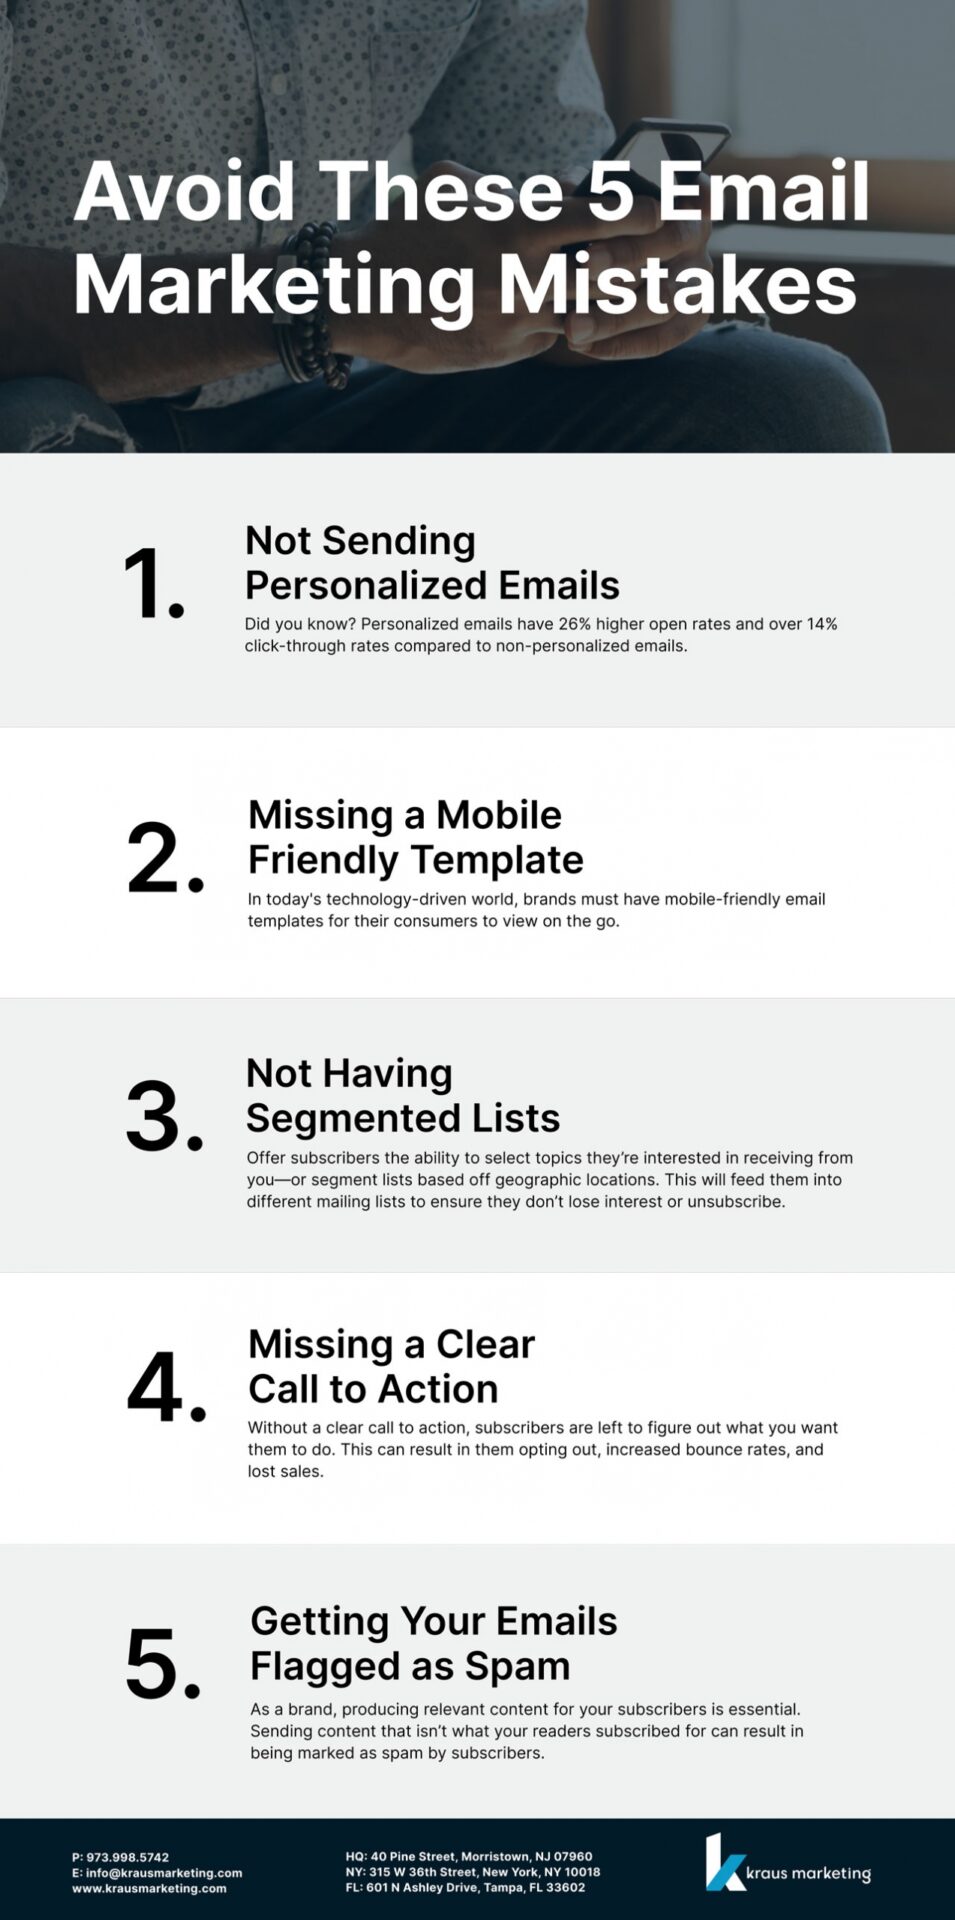 Avoid These 5 Email Marketing Mistakes